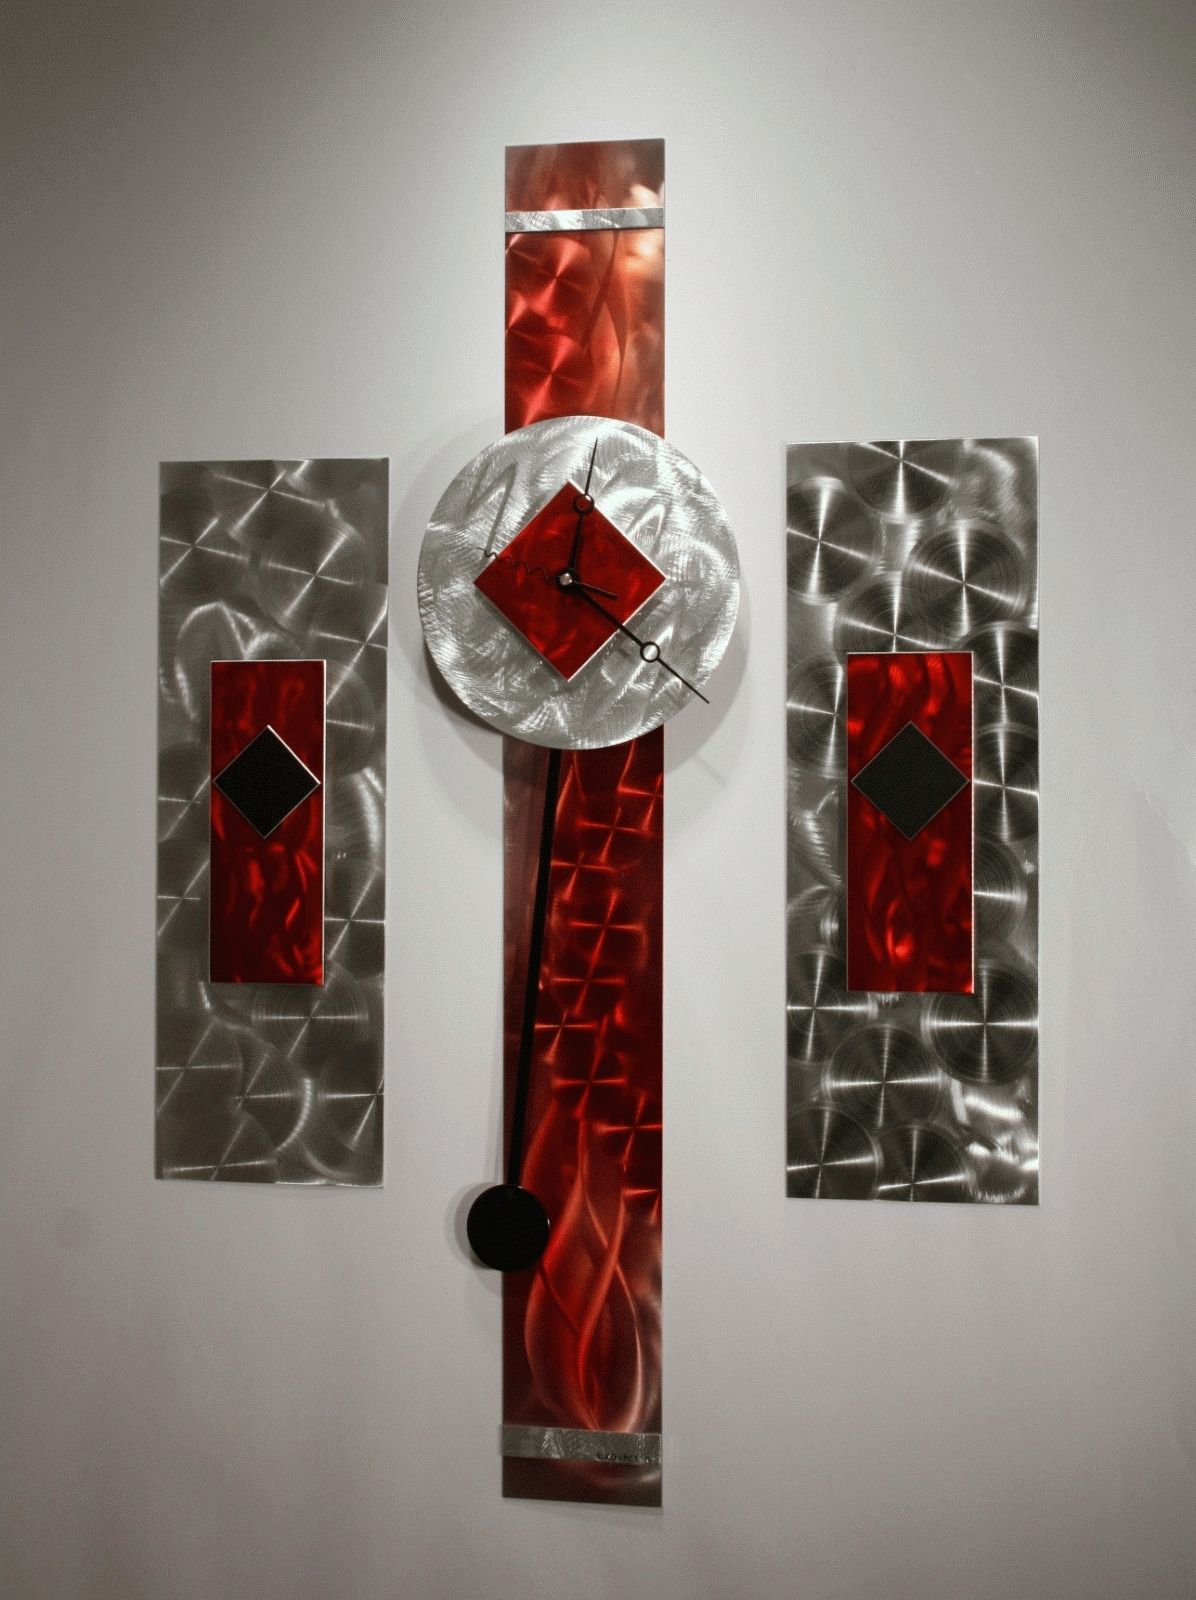 20 Inspirations Of Abstract Wall Art With Clock In Most Up To Date Abstract Metal Wall Art With Clock (View 9 of 20)